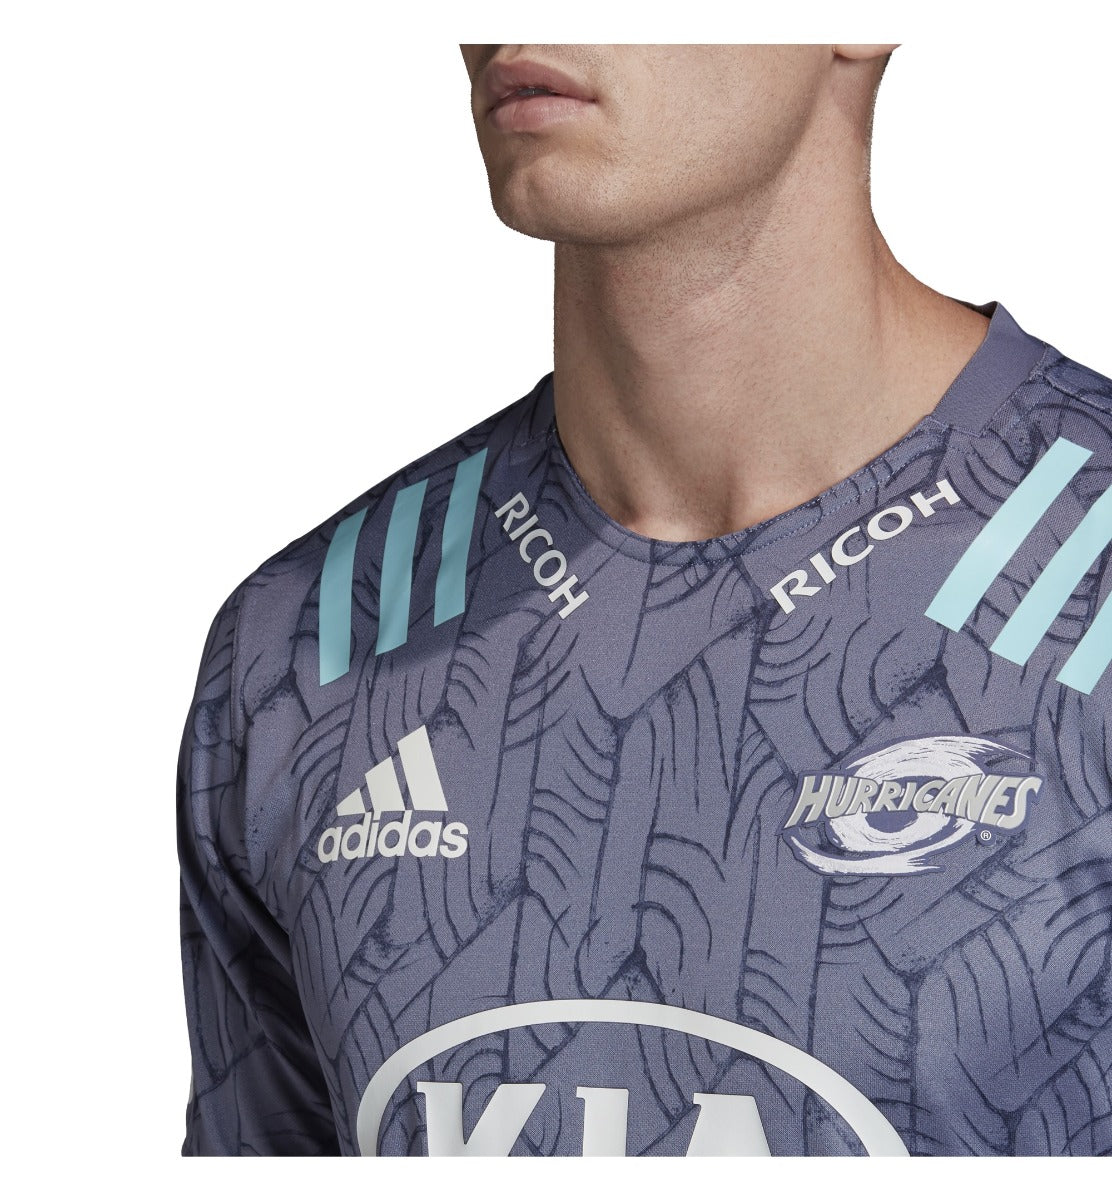 Hurricanes Prime Blue Away Jersey 2020